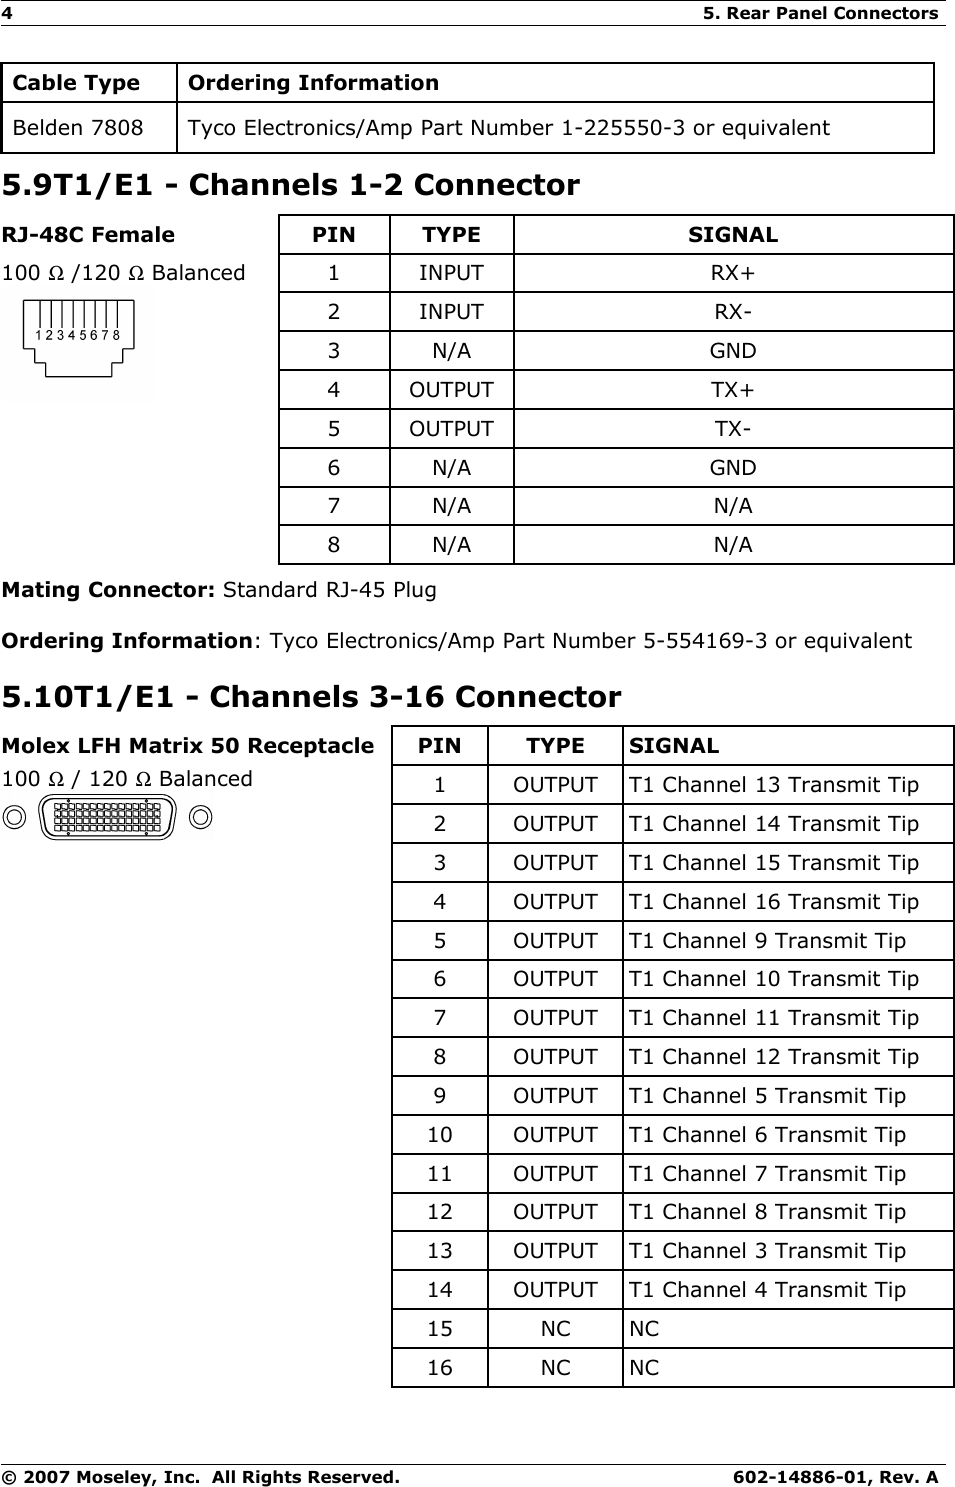 4 5. Rear Panel ConnectorsCable Type Ordering InformationBelden 7808 Tyco Electronics/Amp Part Number 1-225550-3 or equivalent5.9T1/E1 - Channels 1-2 ConnectorRJ-48C Female PIN TYPE SIGNAL100 Ω /120 Ω Balanced  1 INPUT RX+2 INPUT RX-3 N/A GND4 OUTPUT TX+5 OUTPUT TX-6 N/A GND7 N/A N/A8 N/A N/AMating Connector: Standard RJ-45 PlugOrdering Information: Tyco Electronics/Amp Part Number 5-554169-3 or equivalent5.10T1/E1 - Channels 3-16 ConnectorMolex LFH Matrix 50 Receptacle  PIN TYPE SIGNAL100 Ω / 120 Ω Balanced 1 OUTPUT T1 Channel 13 Transmit Tip2 OUTPUT T1 Channel 14 Transmit Tip3 OUTPUT T1 Channel 15 Transmit Tip4 OUTPUT T1 Channel 16 Transmit Tip5 OUTPUT T1 Channel 9 Transmit Tip6 OUTPUT T1 Channel 10 Transmit Tip7 OUTPUT T1 Channel 11 Transmit Tip8 OUTPUT T1 Channel 12 Transmit Tip9 OUTPUT T1 Channel 5 Transmit Tip10 OUTPUT T1 Channel 6 Transmit Tip11 OUTPUT T1 Channel 7 Transmit Tip12 OUTPUT T1 Channel 8 Transmit Tip13 OUTPUT T1 Channel 3 Transmit Tip14 OUTPUT T1 Channel 4 Transmit Tip15 NC NC16 NC NC© 2007 Moseley, Inc.  All Rights Reserved. 602-14886-01, Rev. A